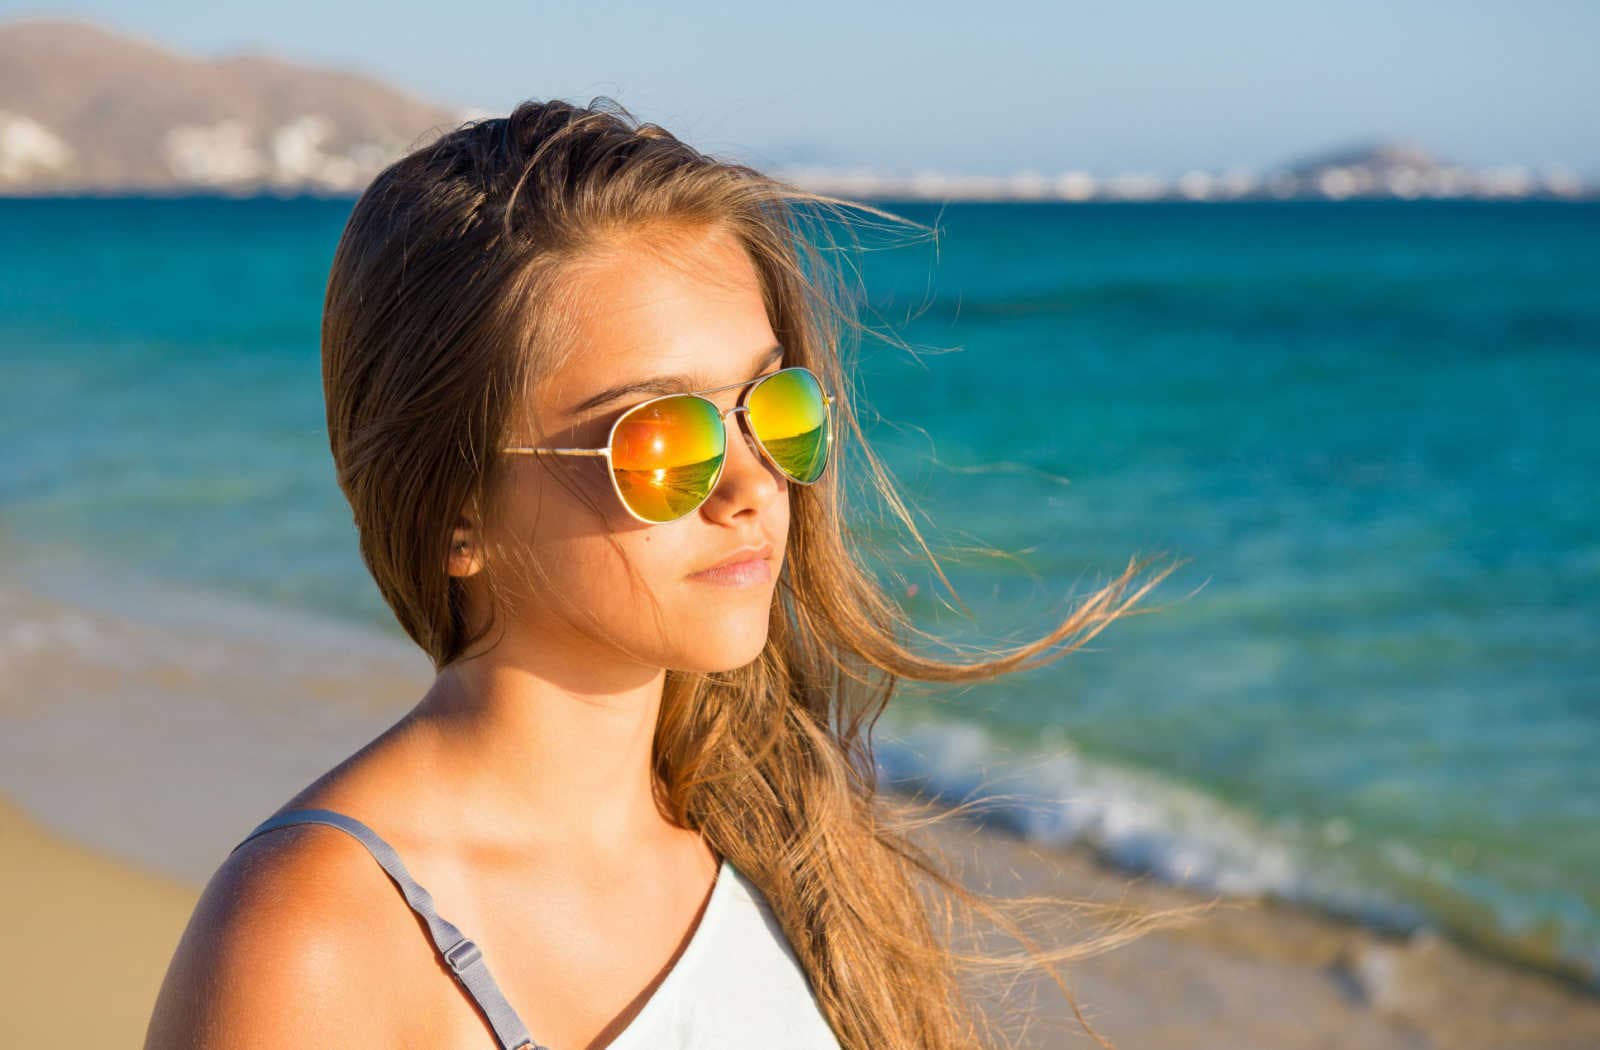 The Advantages of Polarized Sunglasses - All About Vision